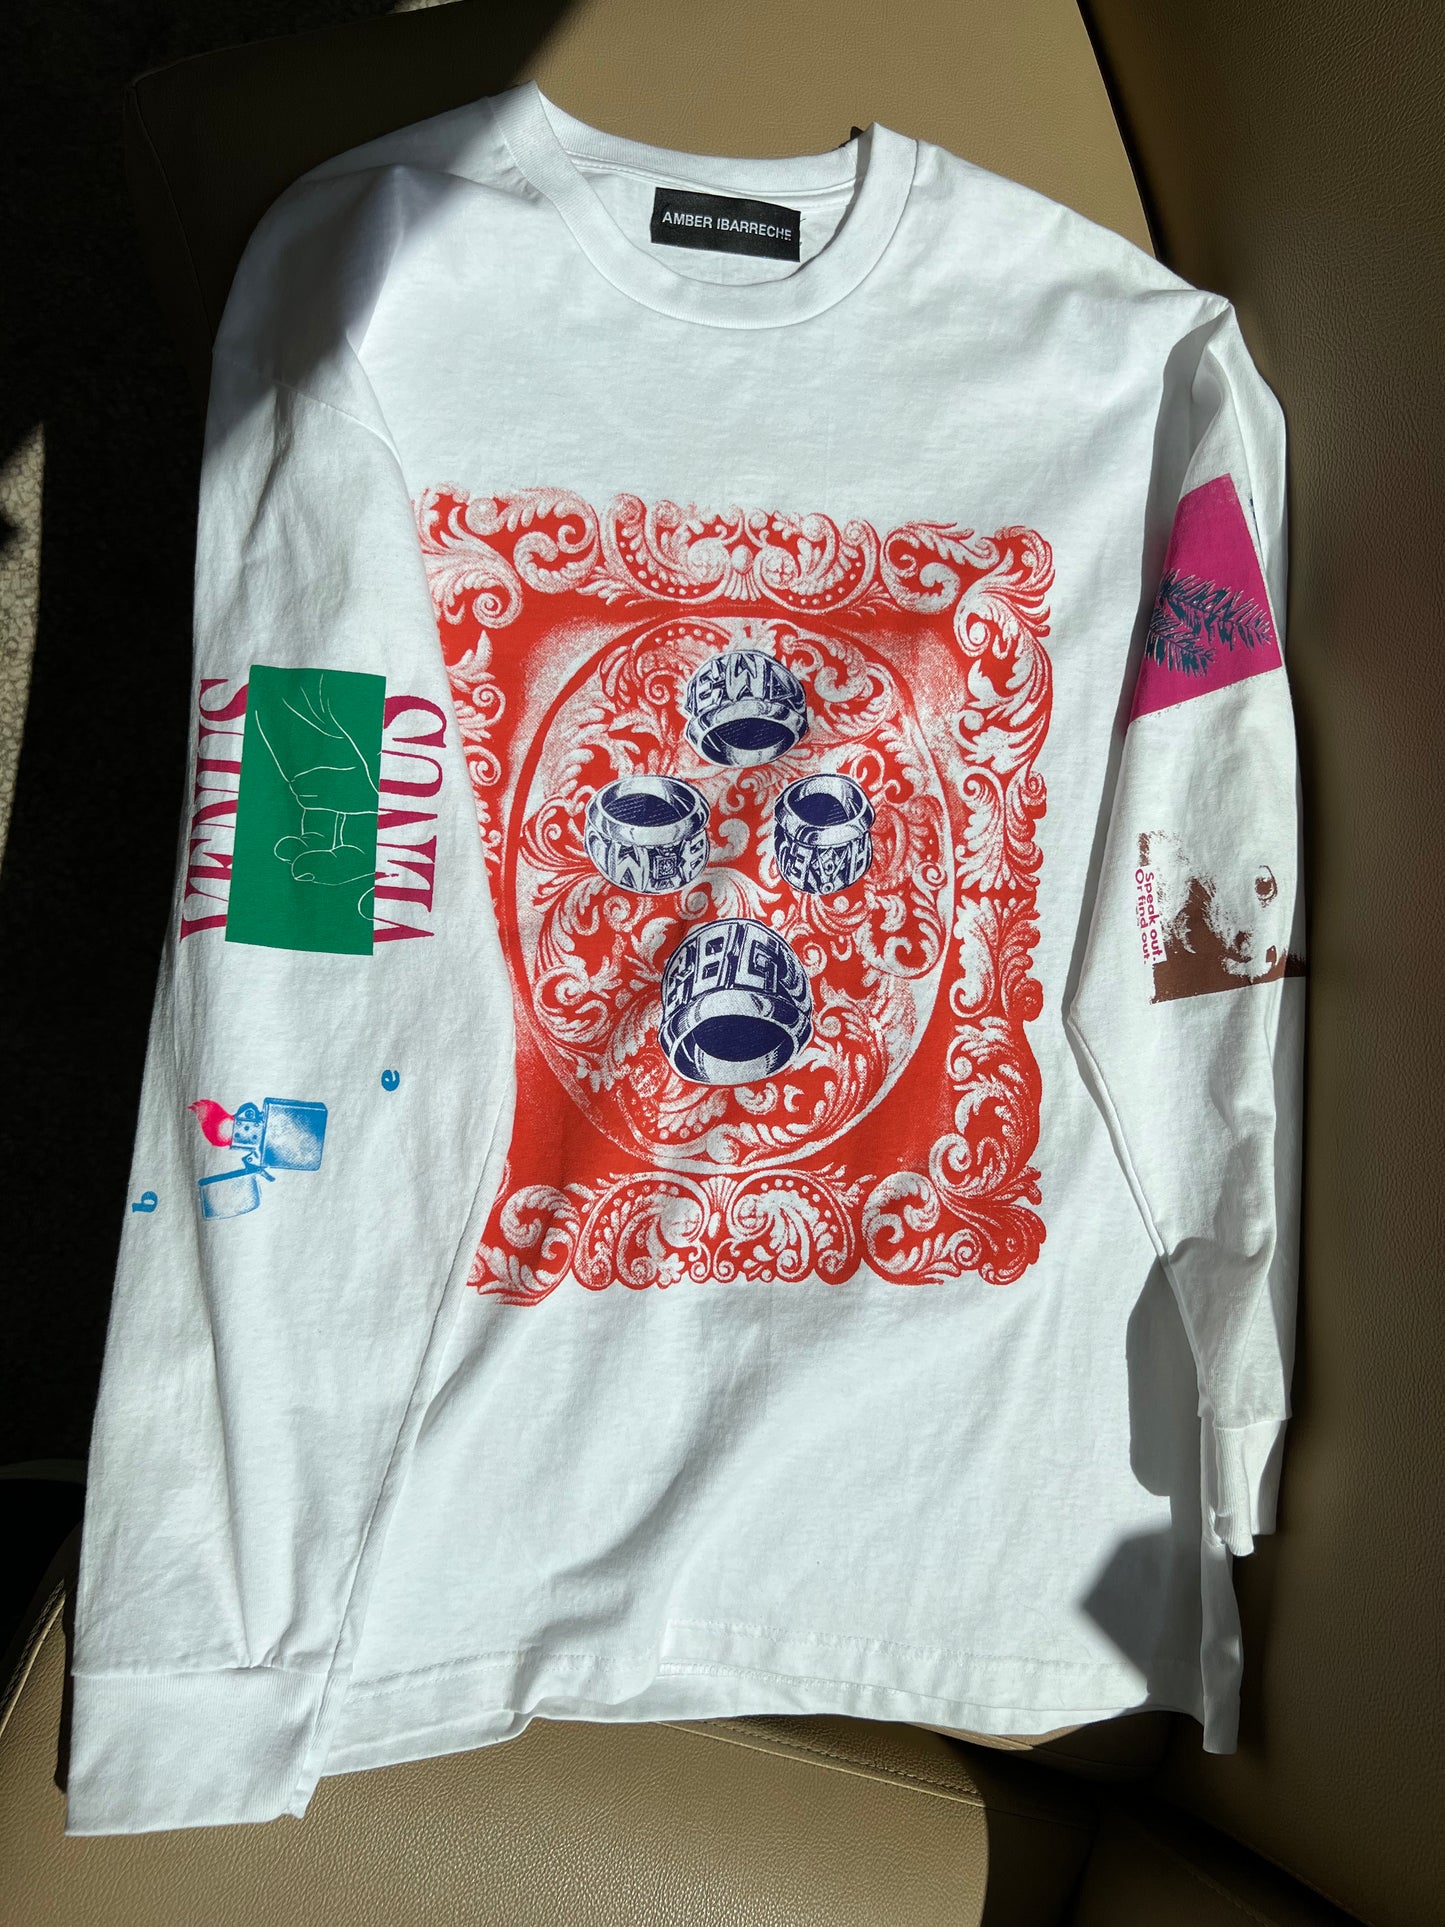 white cotton long sleeve shirt with hand printed collage work down the front and sleeves the left sleeve has a sketch of a lighter with a neon pink flame, closer to the shoulder is the word venus in all caps split by a green rectangle with a white sketch of a hand, palm up